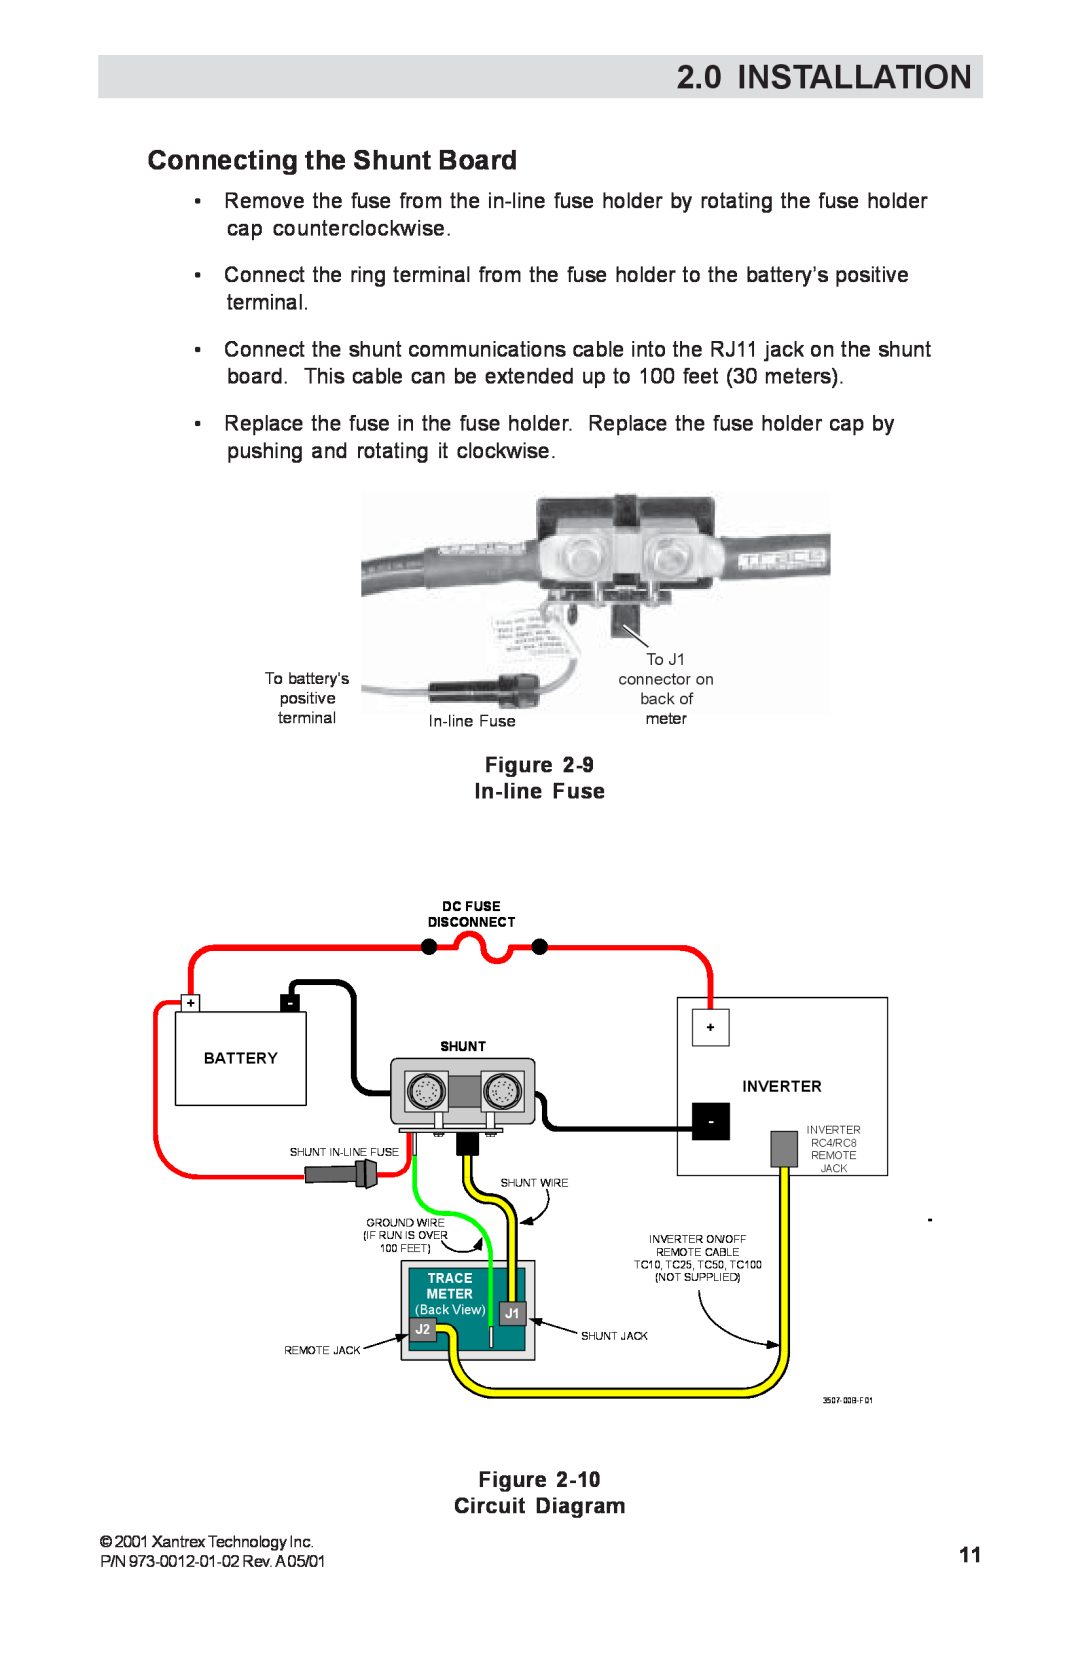 Xantrex Technology TM500A manual Connecting the Shunt Board, In-line Fuse, Circuit Diagram, Installation 